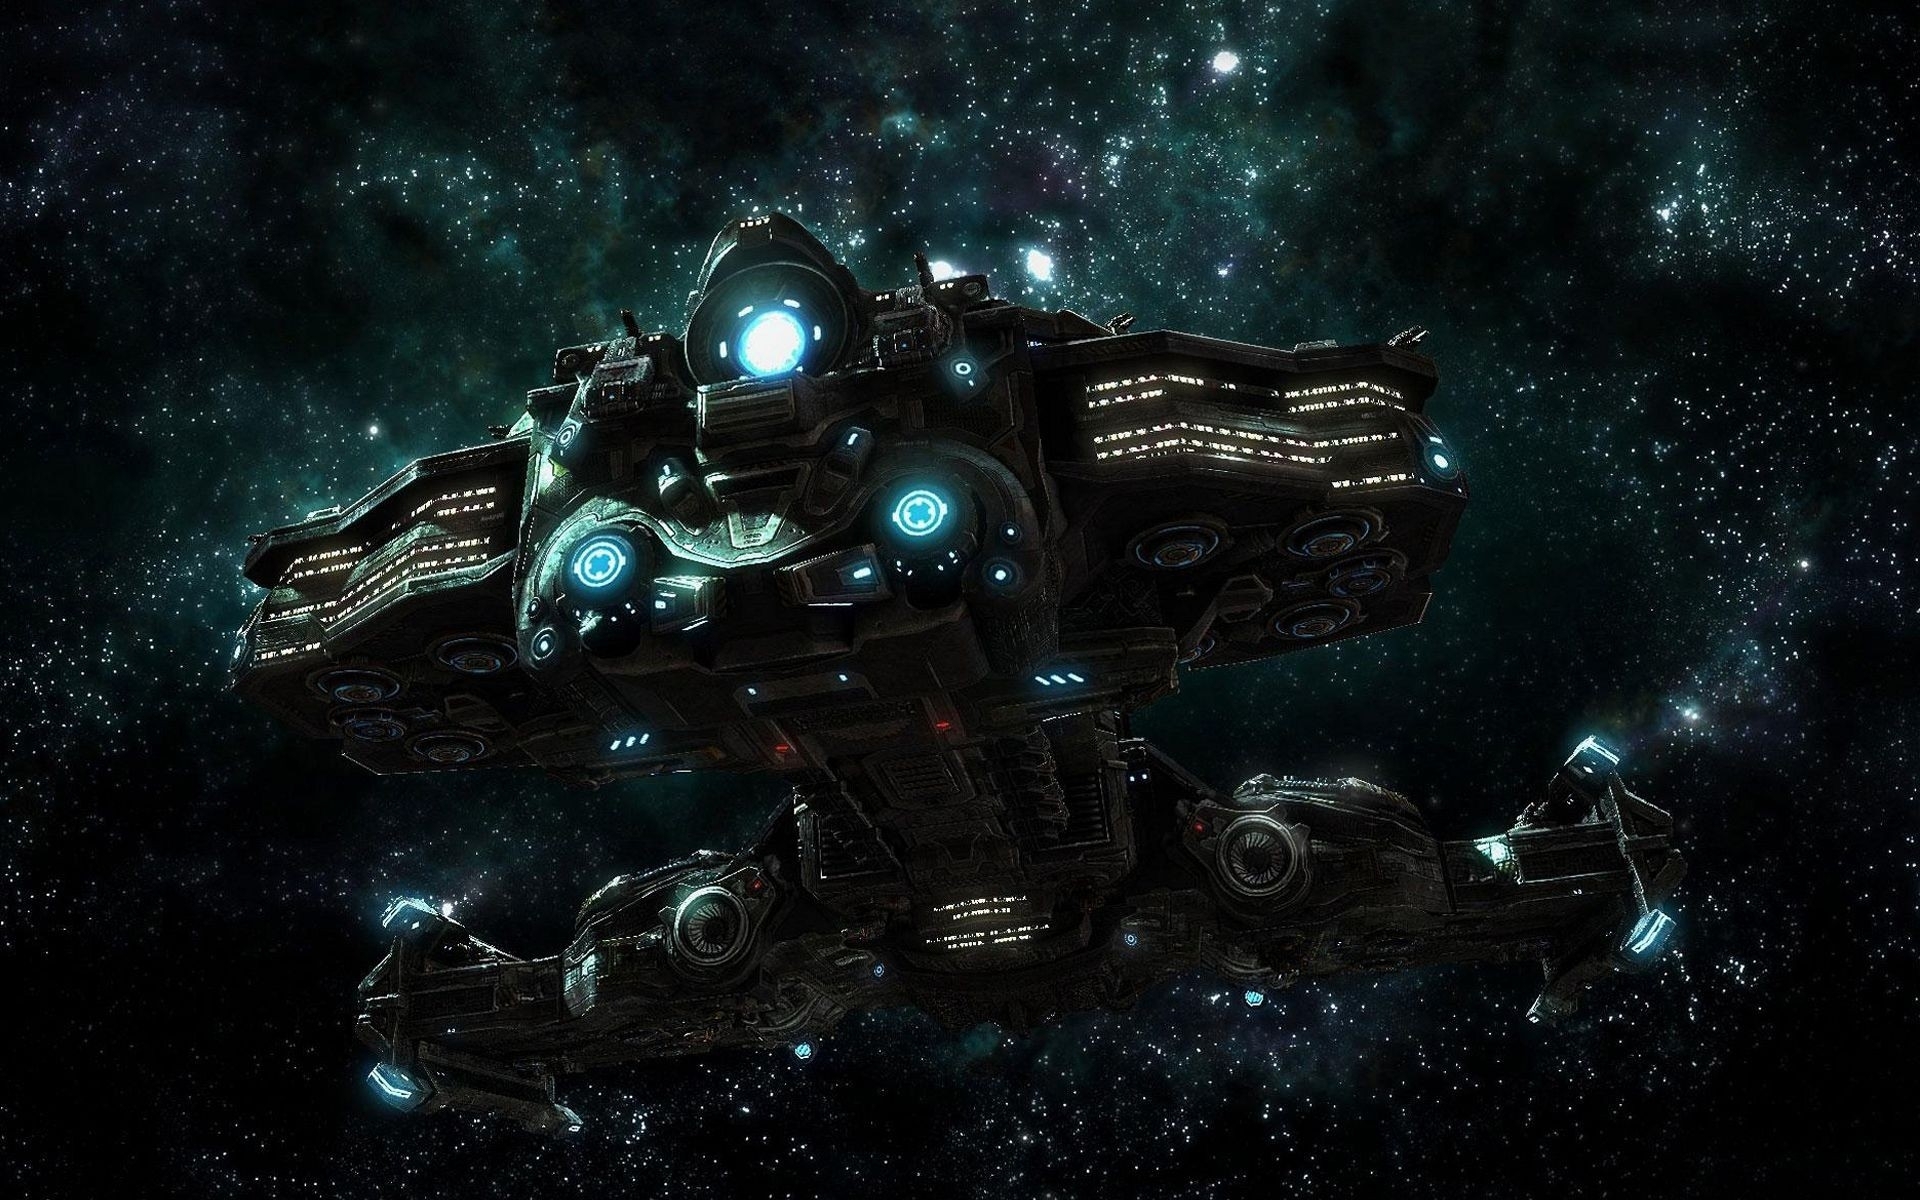 starcraft, Pc, Spacescape, Science, Fiction, Sci fi, Spaceship, Spaceships Wallpaper